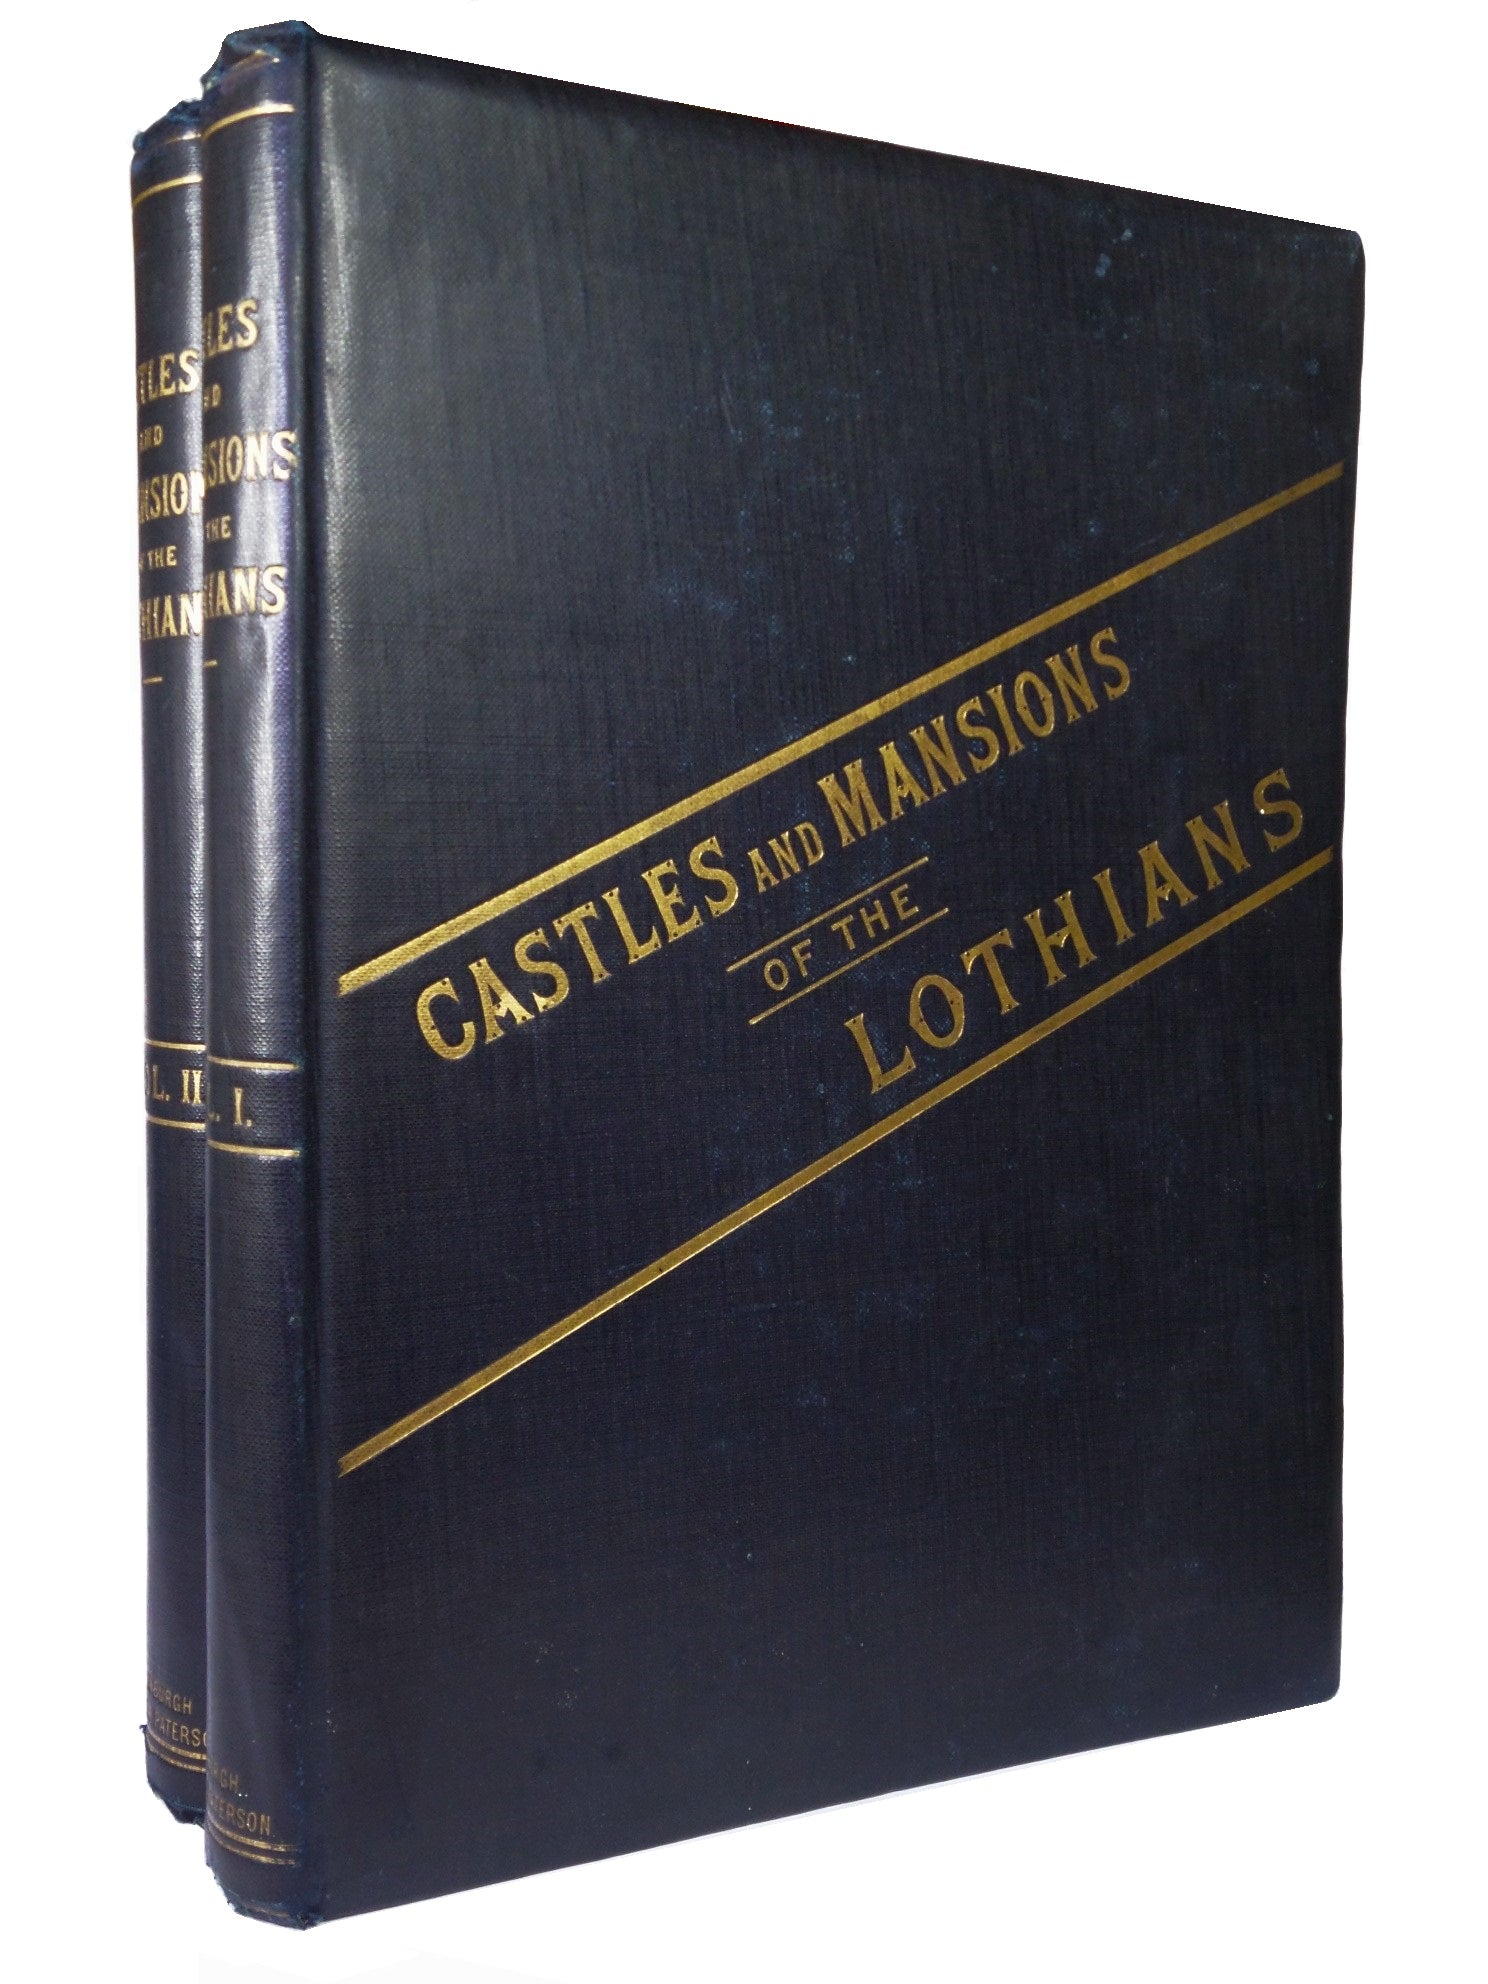 CASTLES AND MANSIONS OF THE LOTHIANS BY JOHN SMALL 1883 FIRST EDITION IN TWO VOLUMES